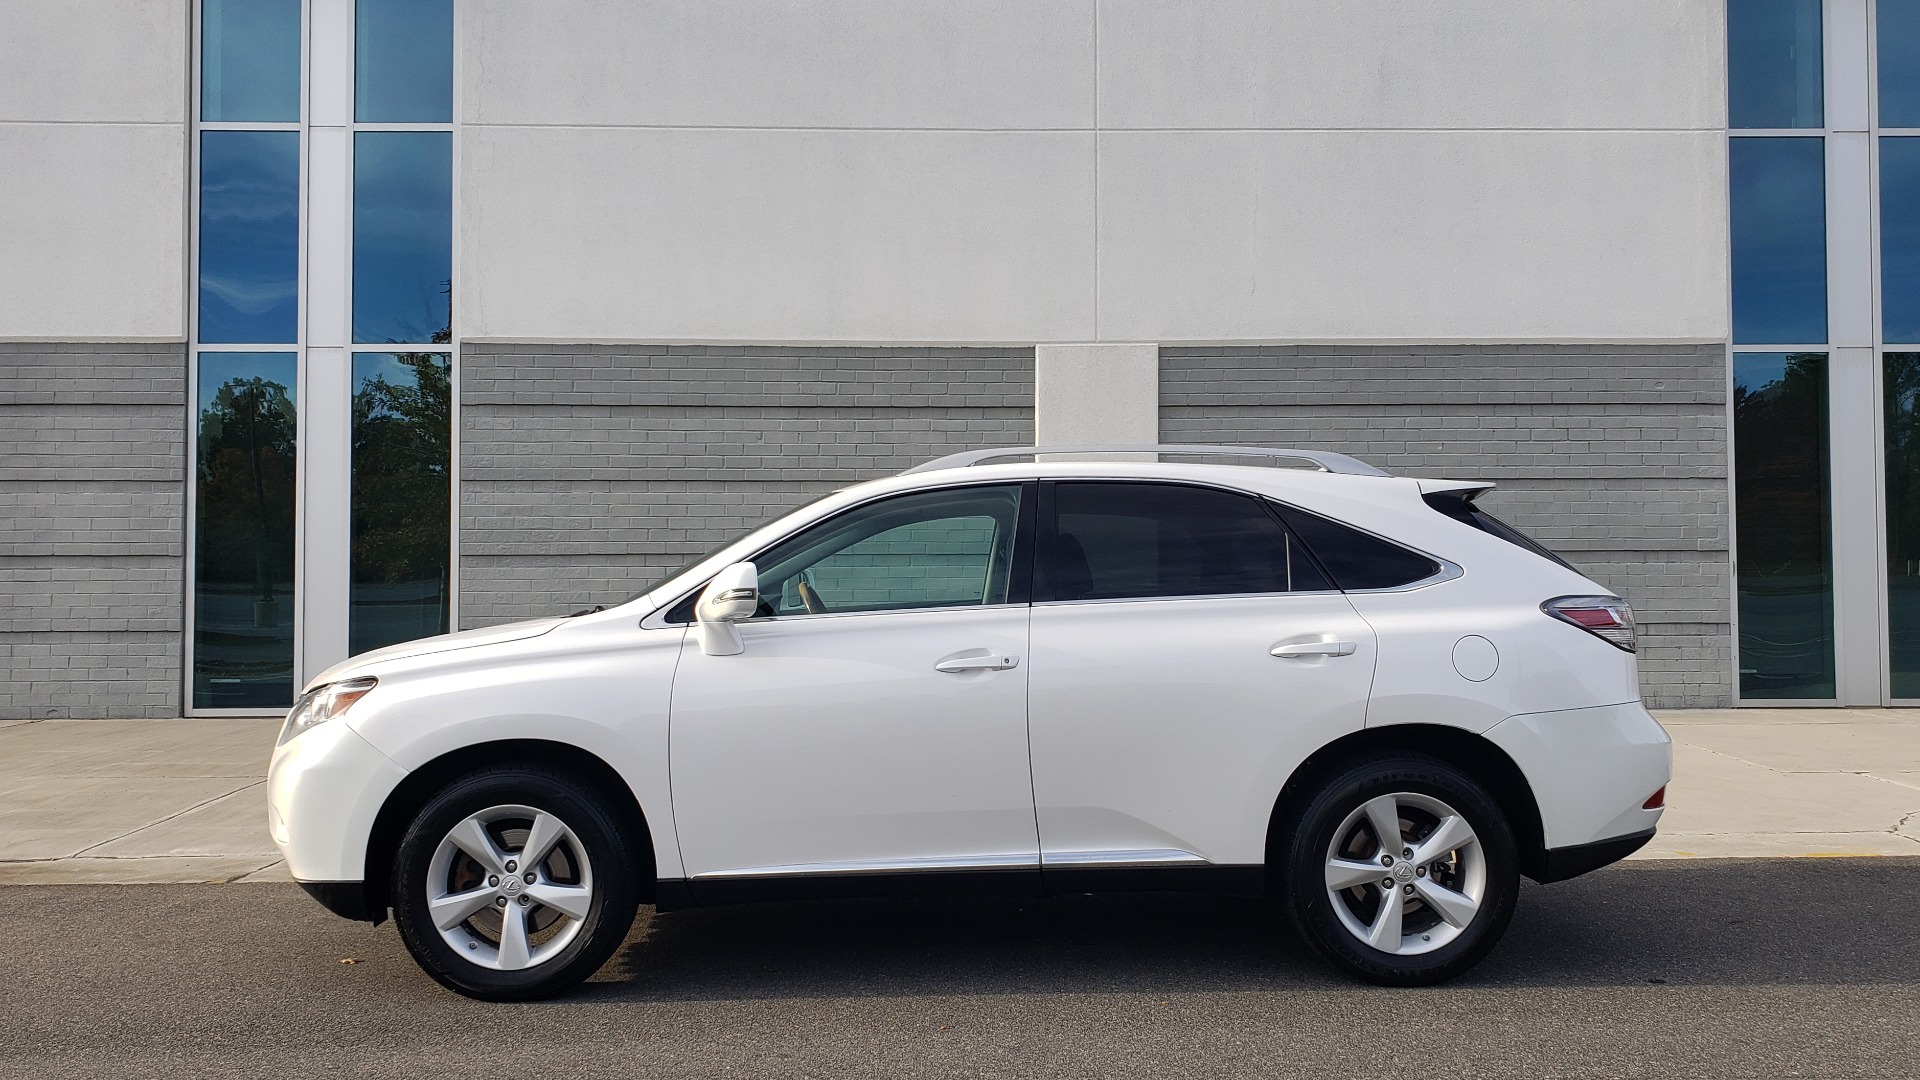 Used 2011 Lexus RX 350 5-DR SUV AWD / PREMIUM / COMFORT / TOWING / PREM AUDIO / NAV for sale Sold at Formula Imports in Charlotte NC 28227 3